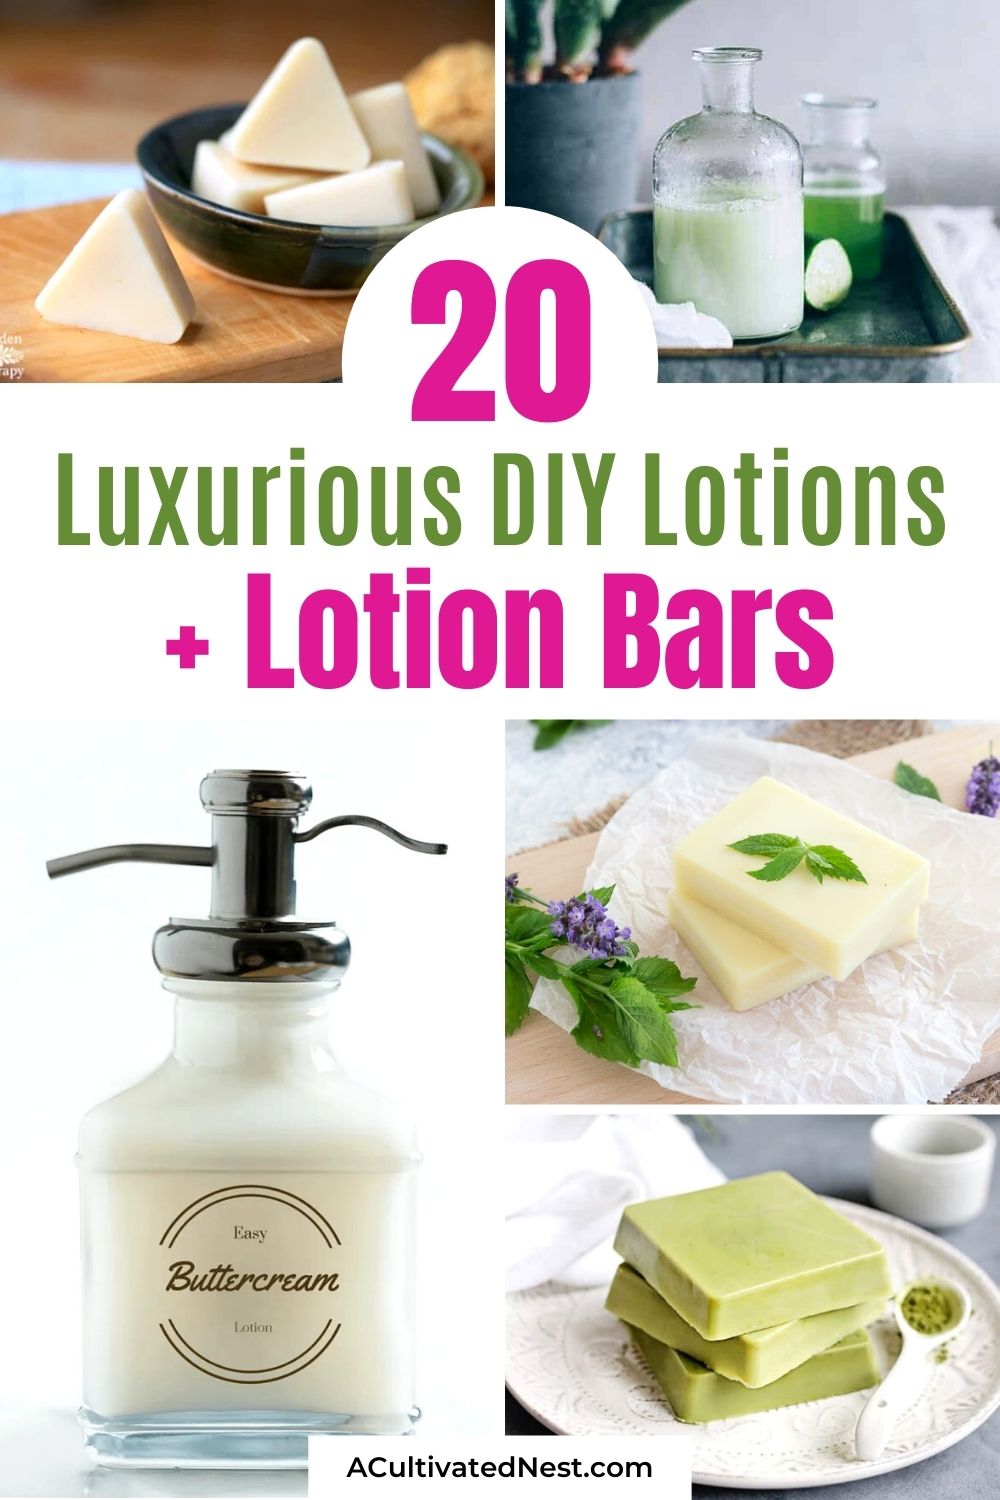 20 Luxurious DIY Lotions and Lotion Bars- If you want a thoughtful homemade gift, or just want some all-natural lotion, then you need to learn how to make some of these 20 luxurious DIY lotions and lotion Bars! | #homemadeBeauty #homemadeLotion #diyLotionBars #crafts #ACultivatedNest